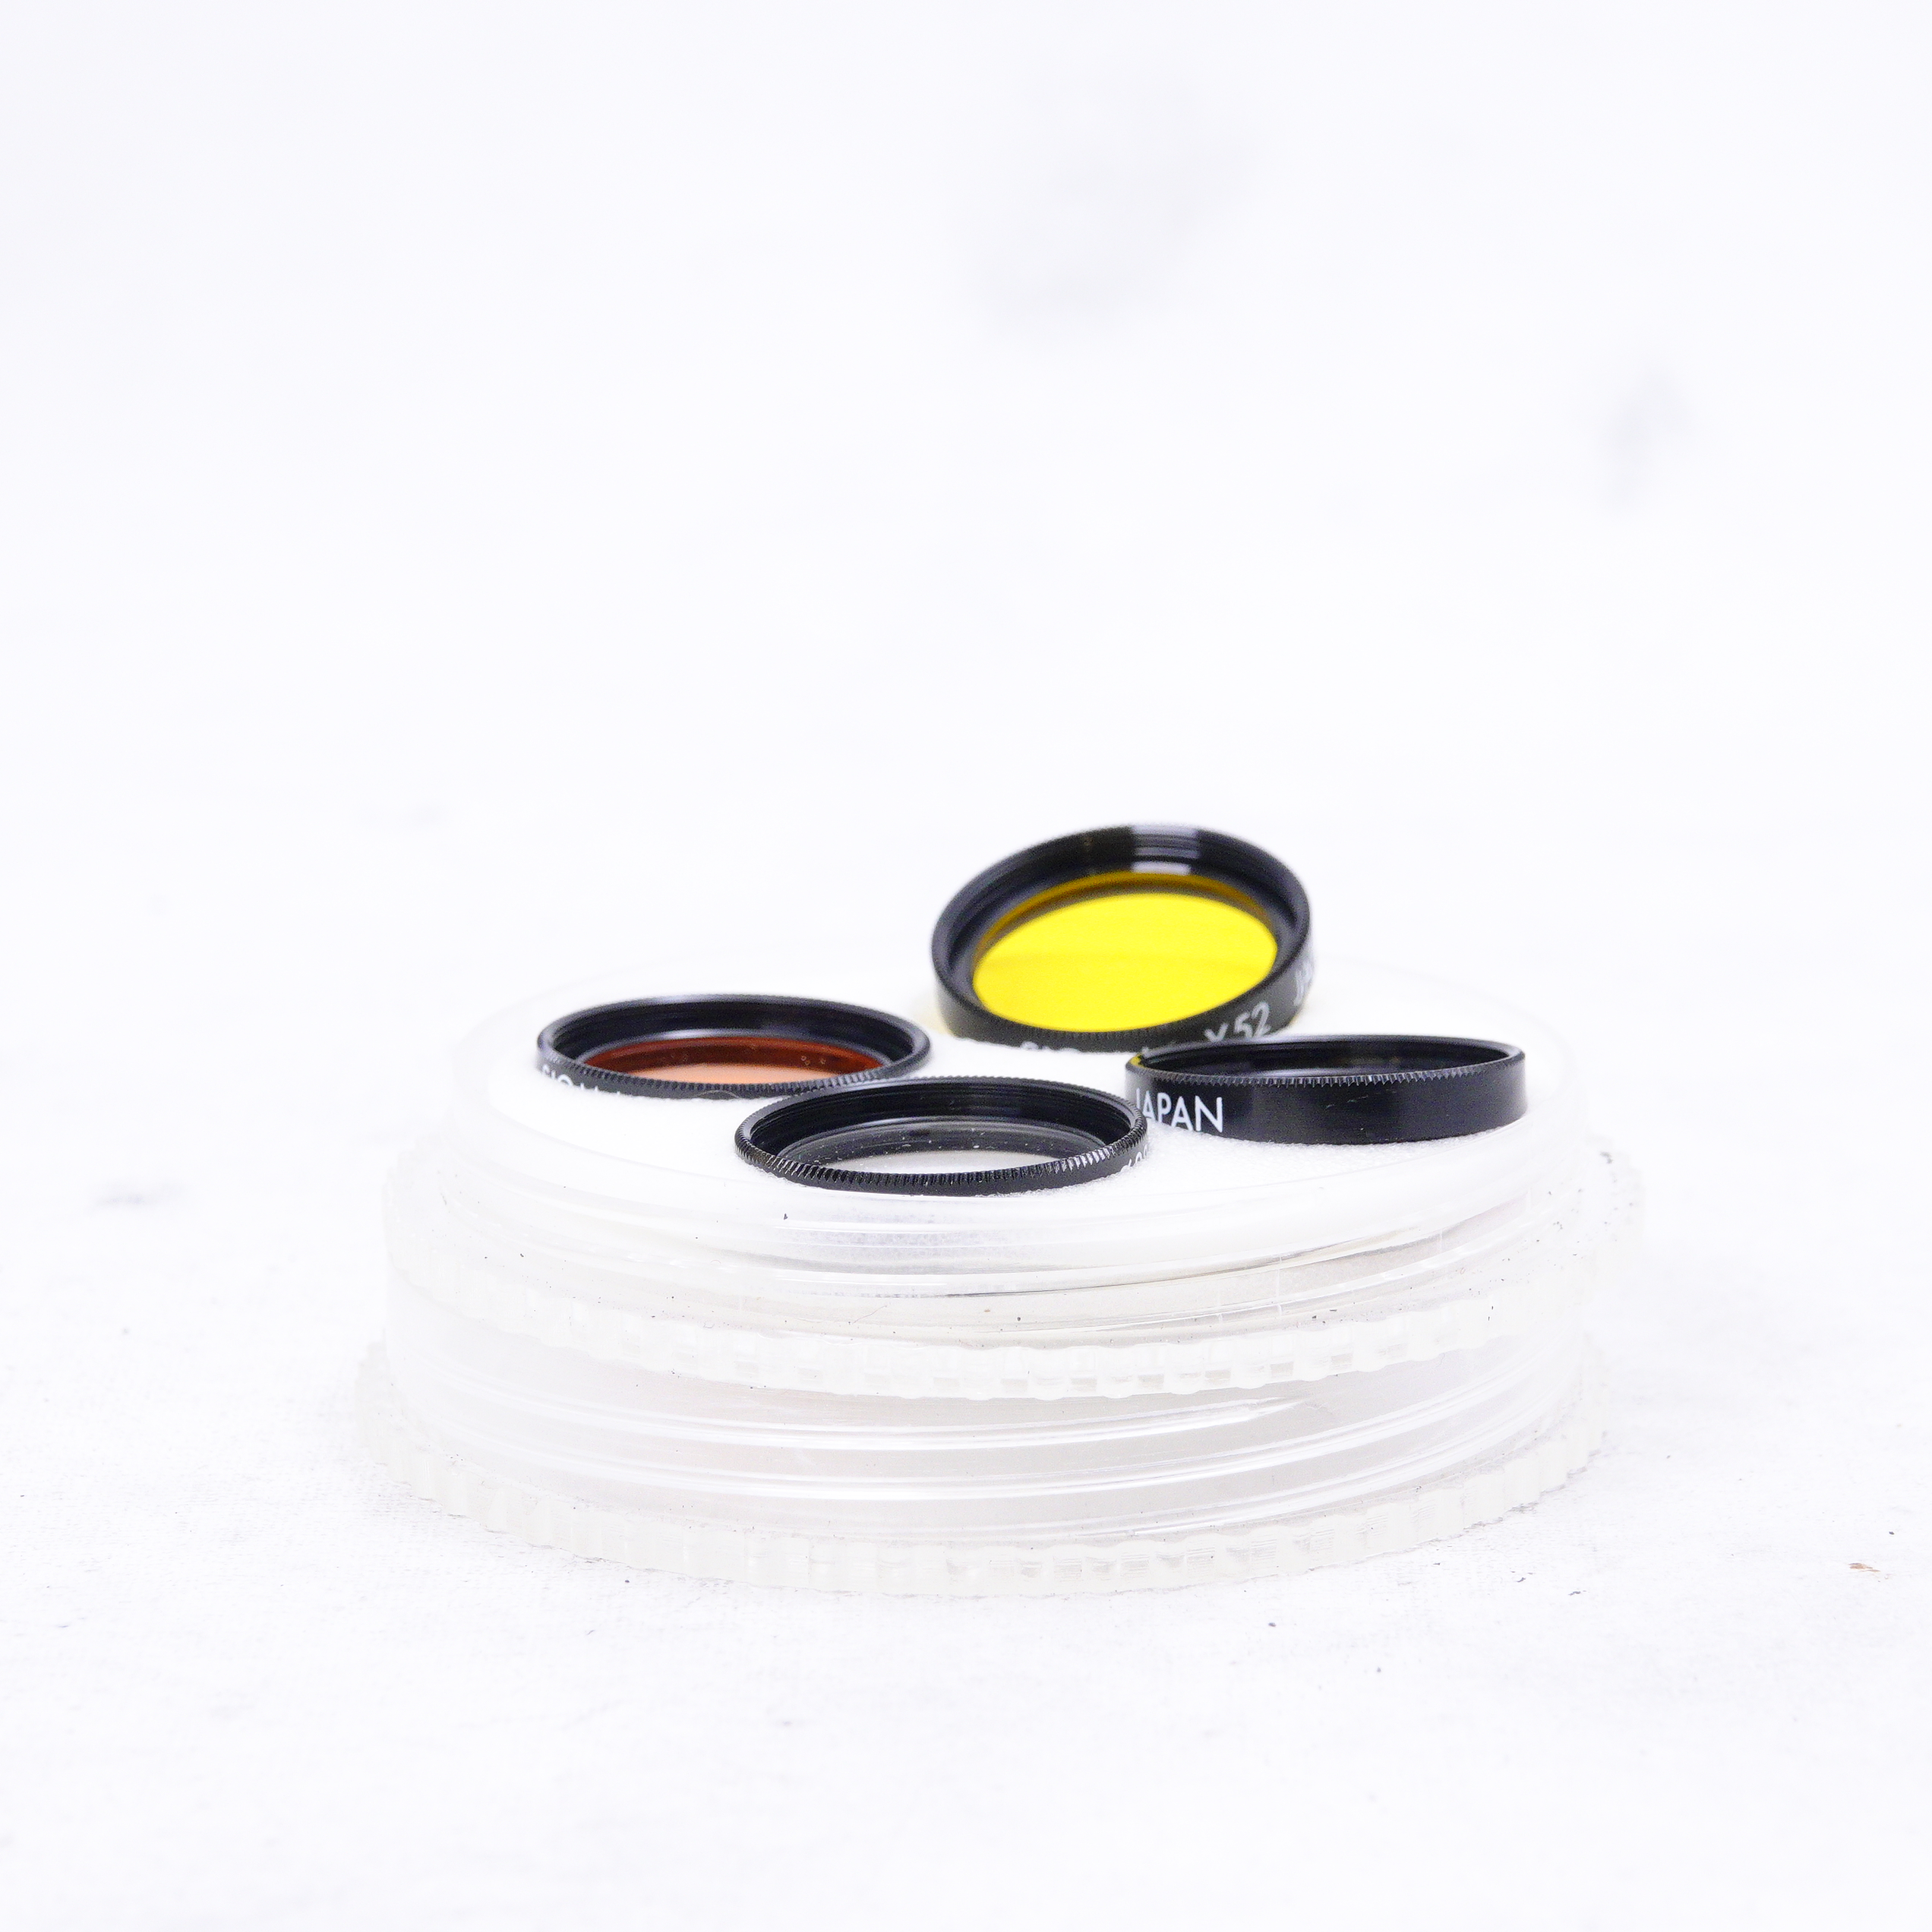 SIGMA pack 22.5mm GLASS FILTERS- Usado